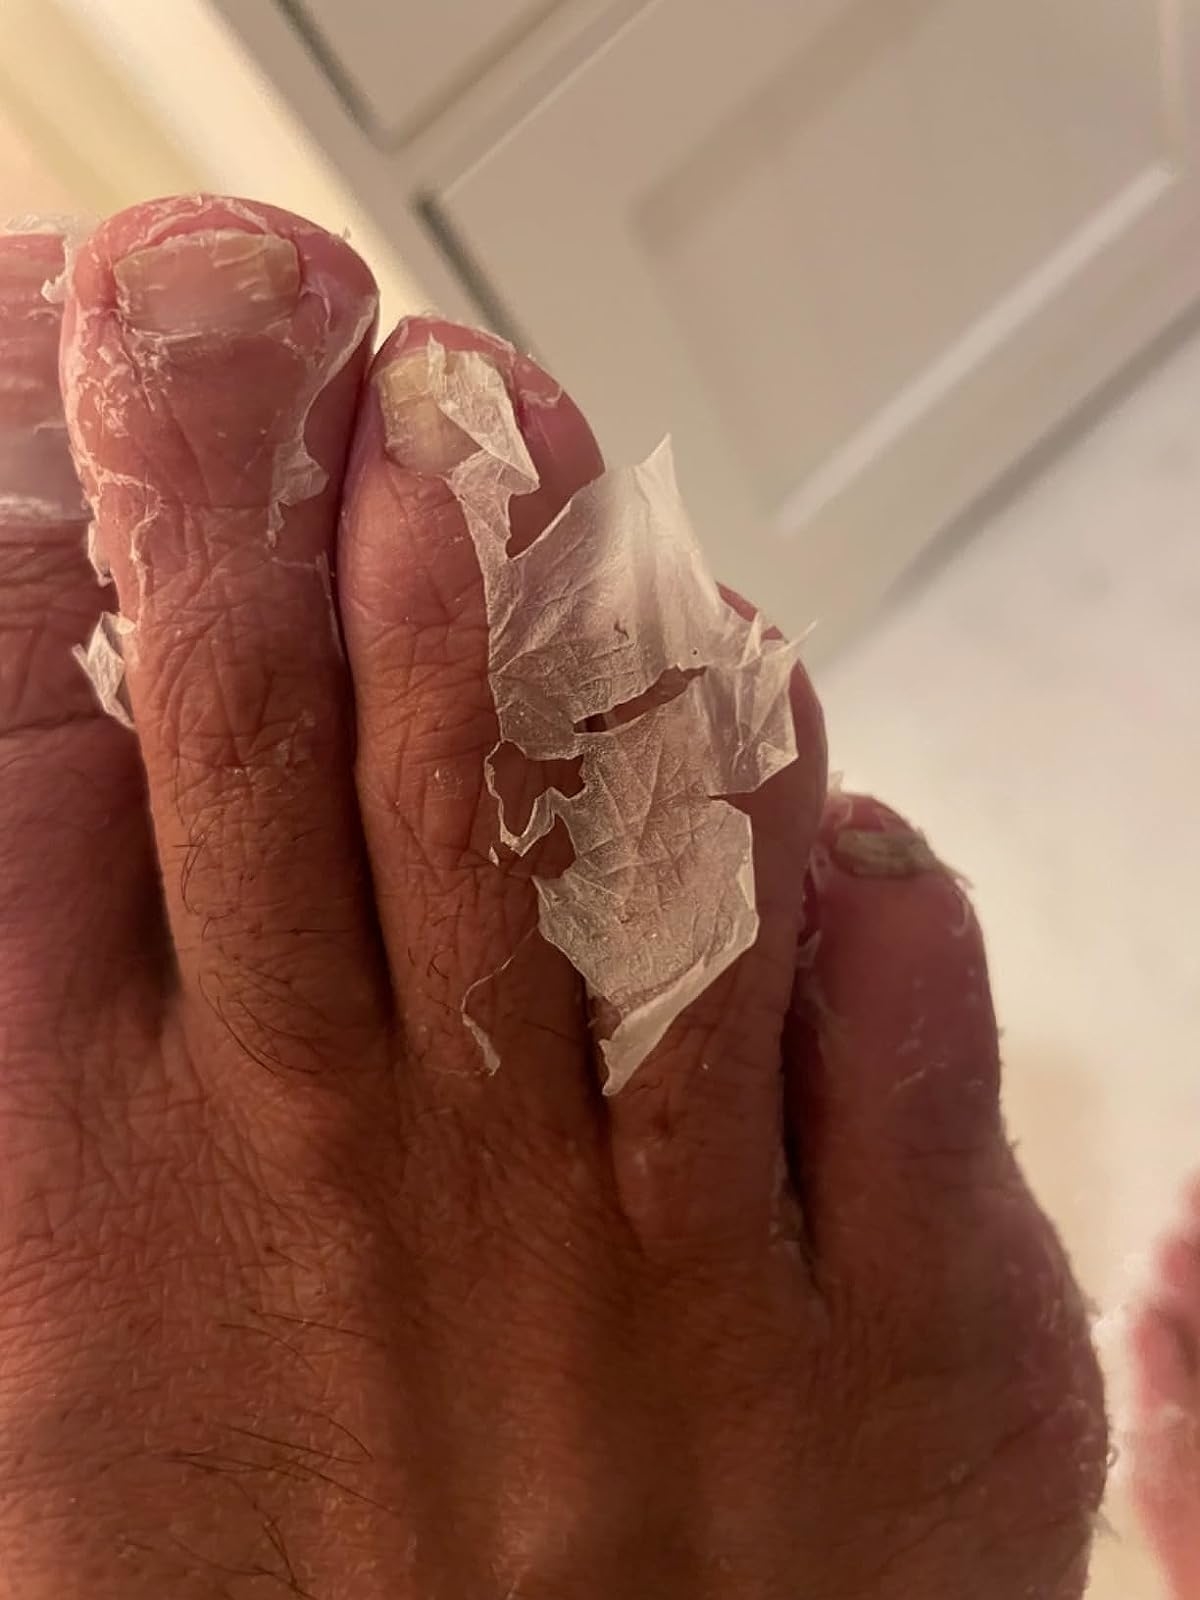 Reviewer showing their foot with the peeling mask